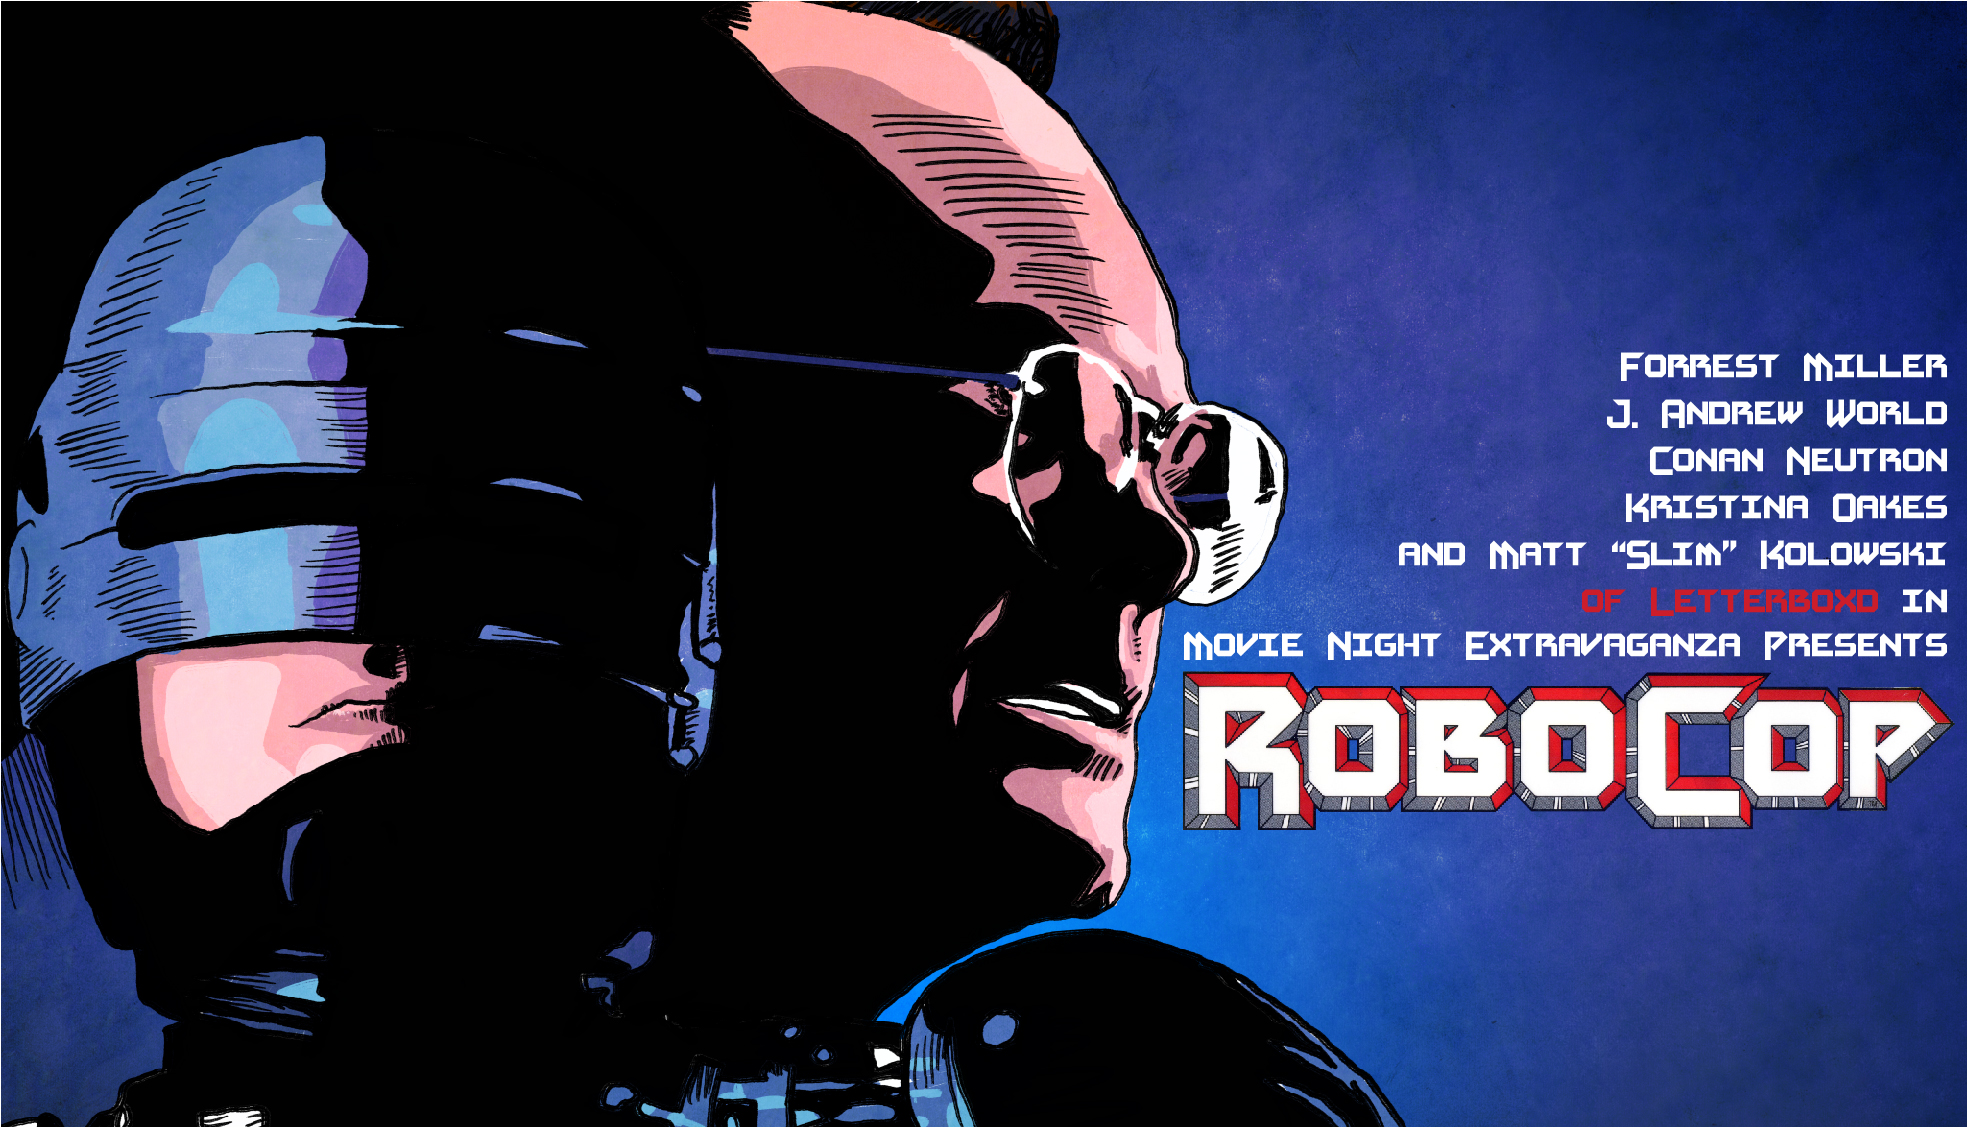 Episode 150: Robocop with Slim from Letterboxd and 70mm pod